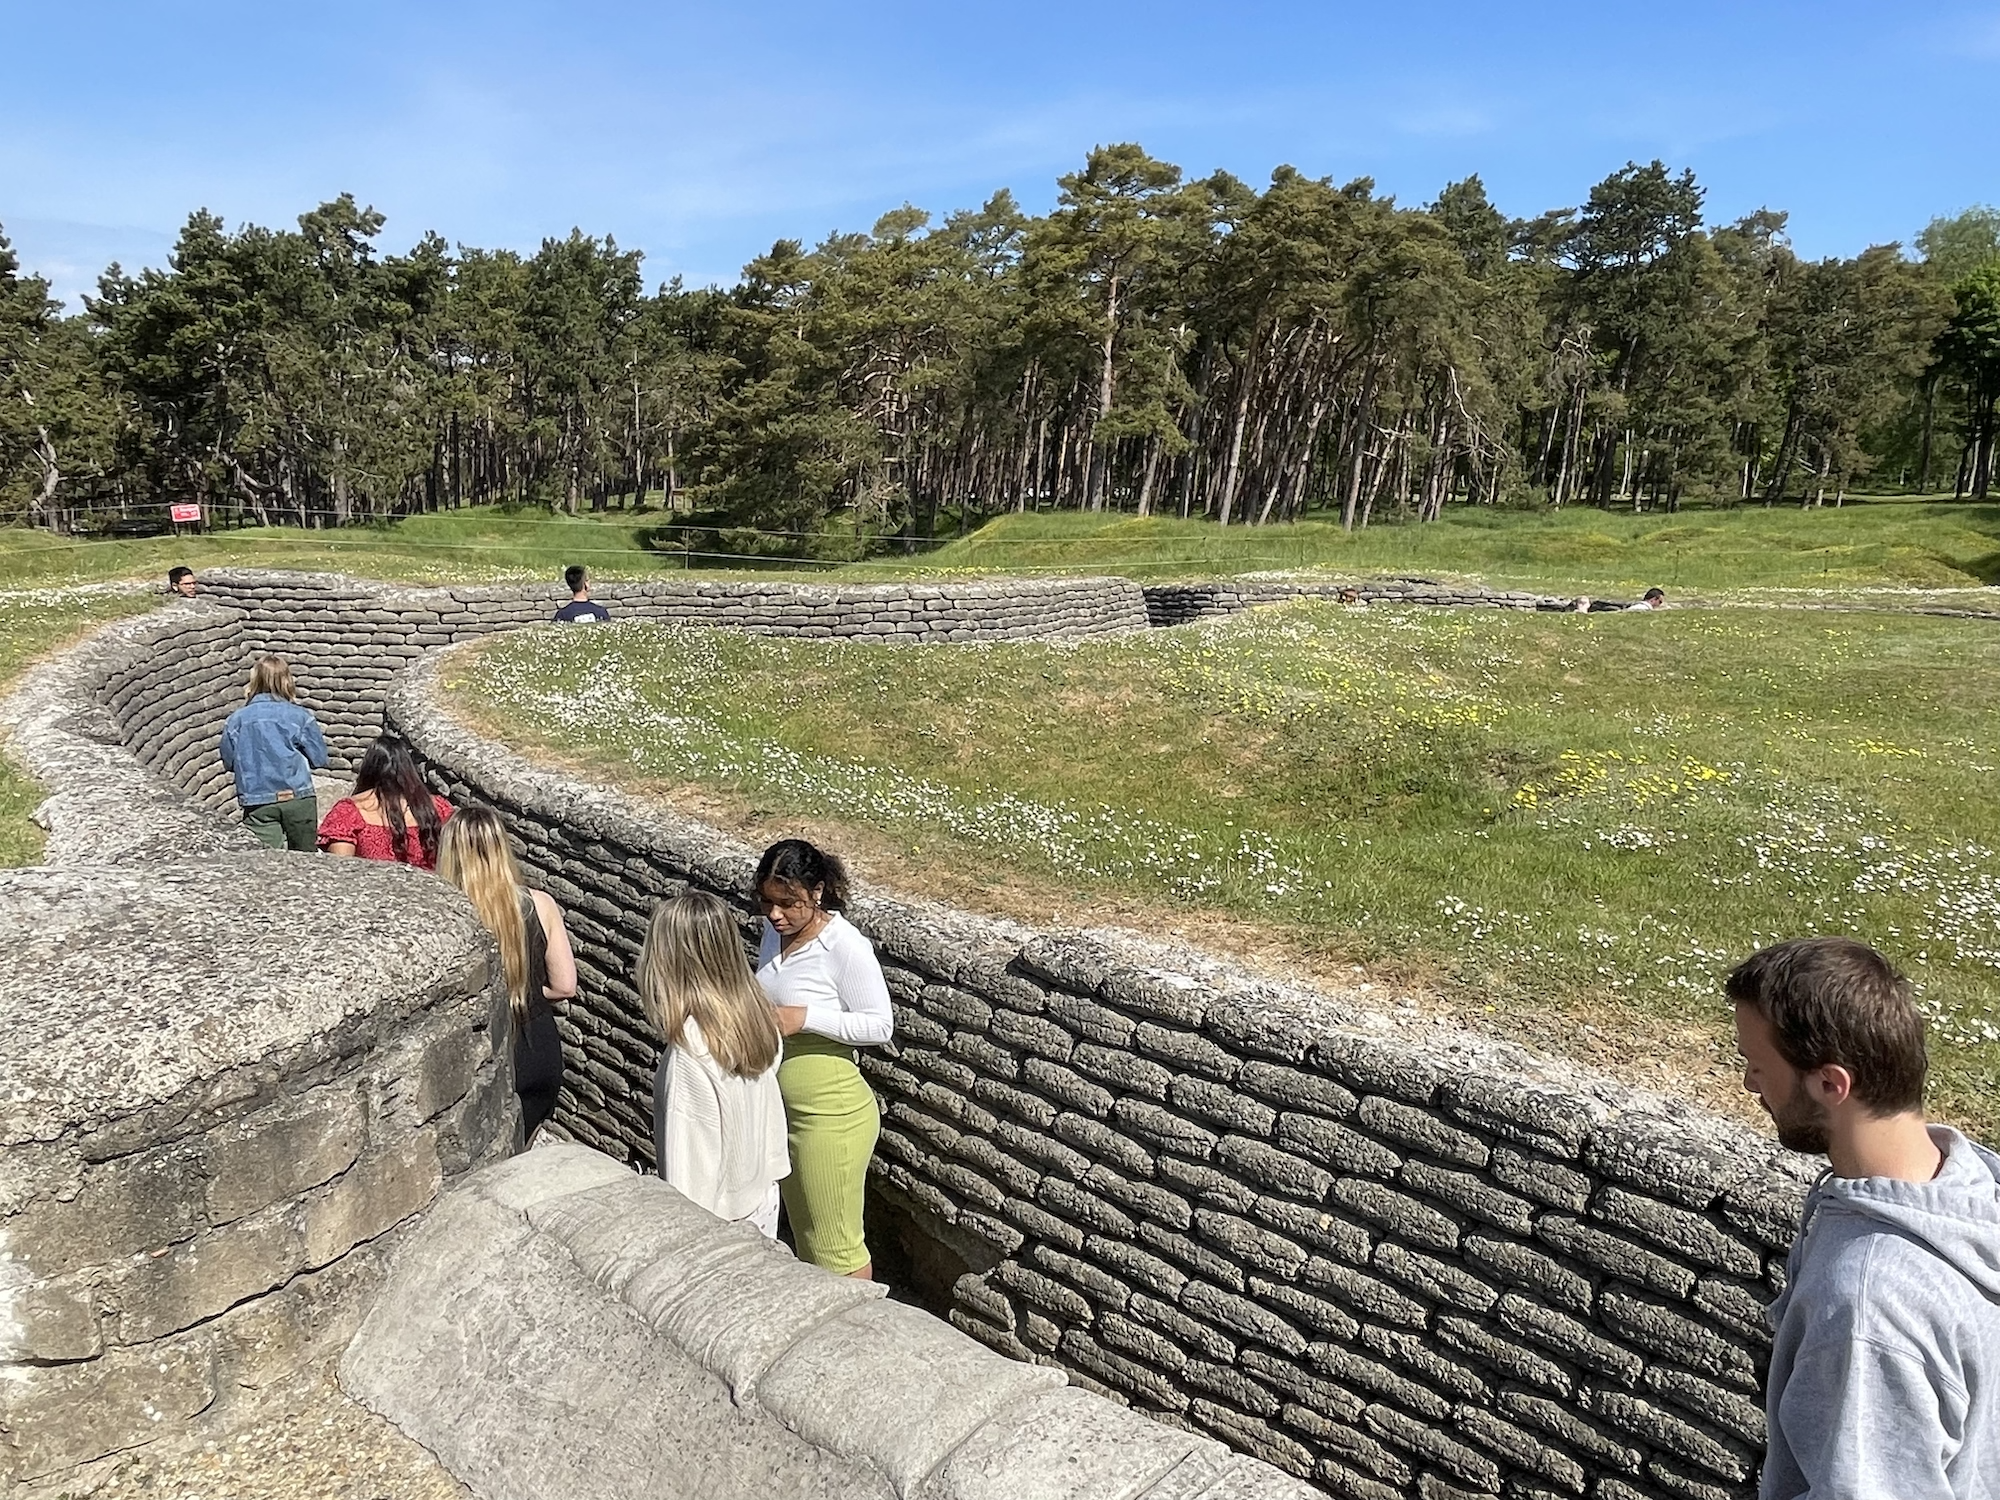 Students tour trenches as part of a tour of Vimy Ridge Battlefield in Northern France